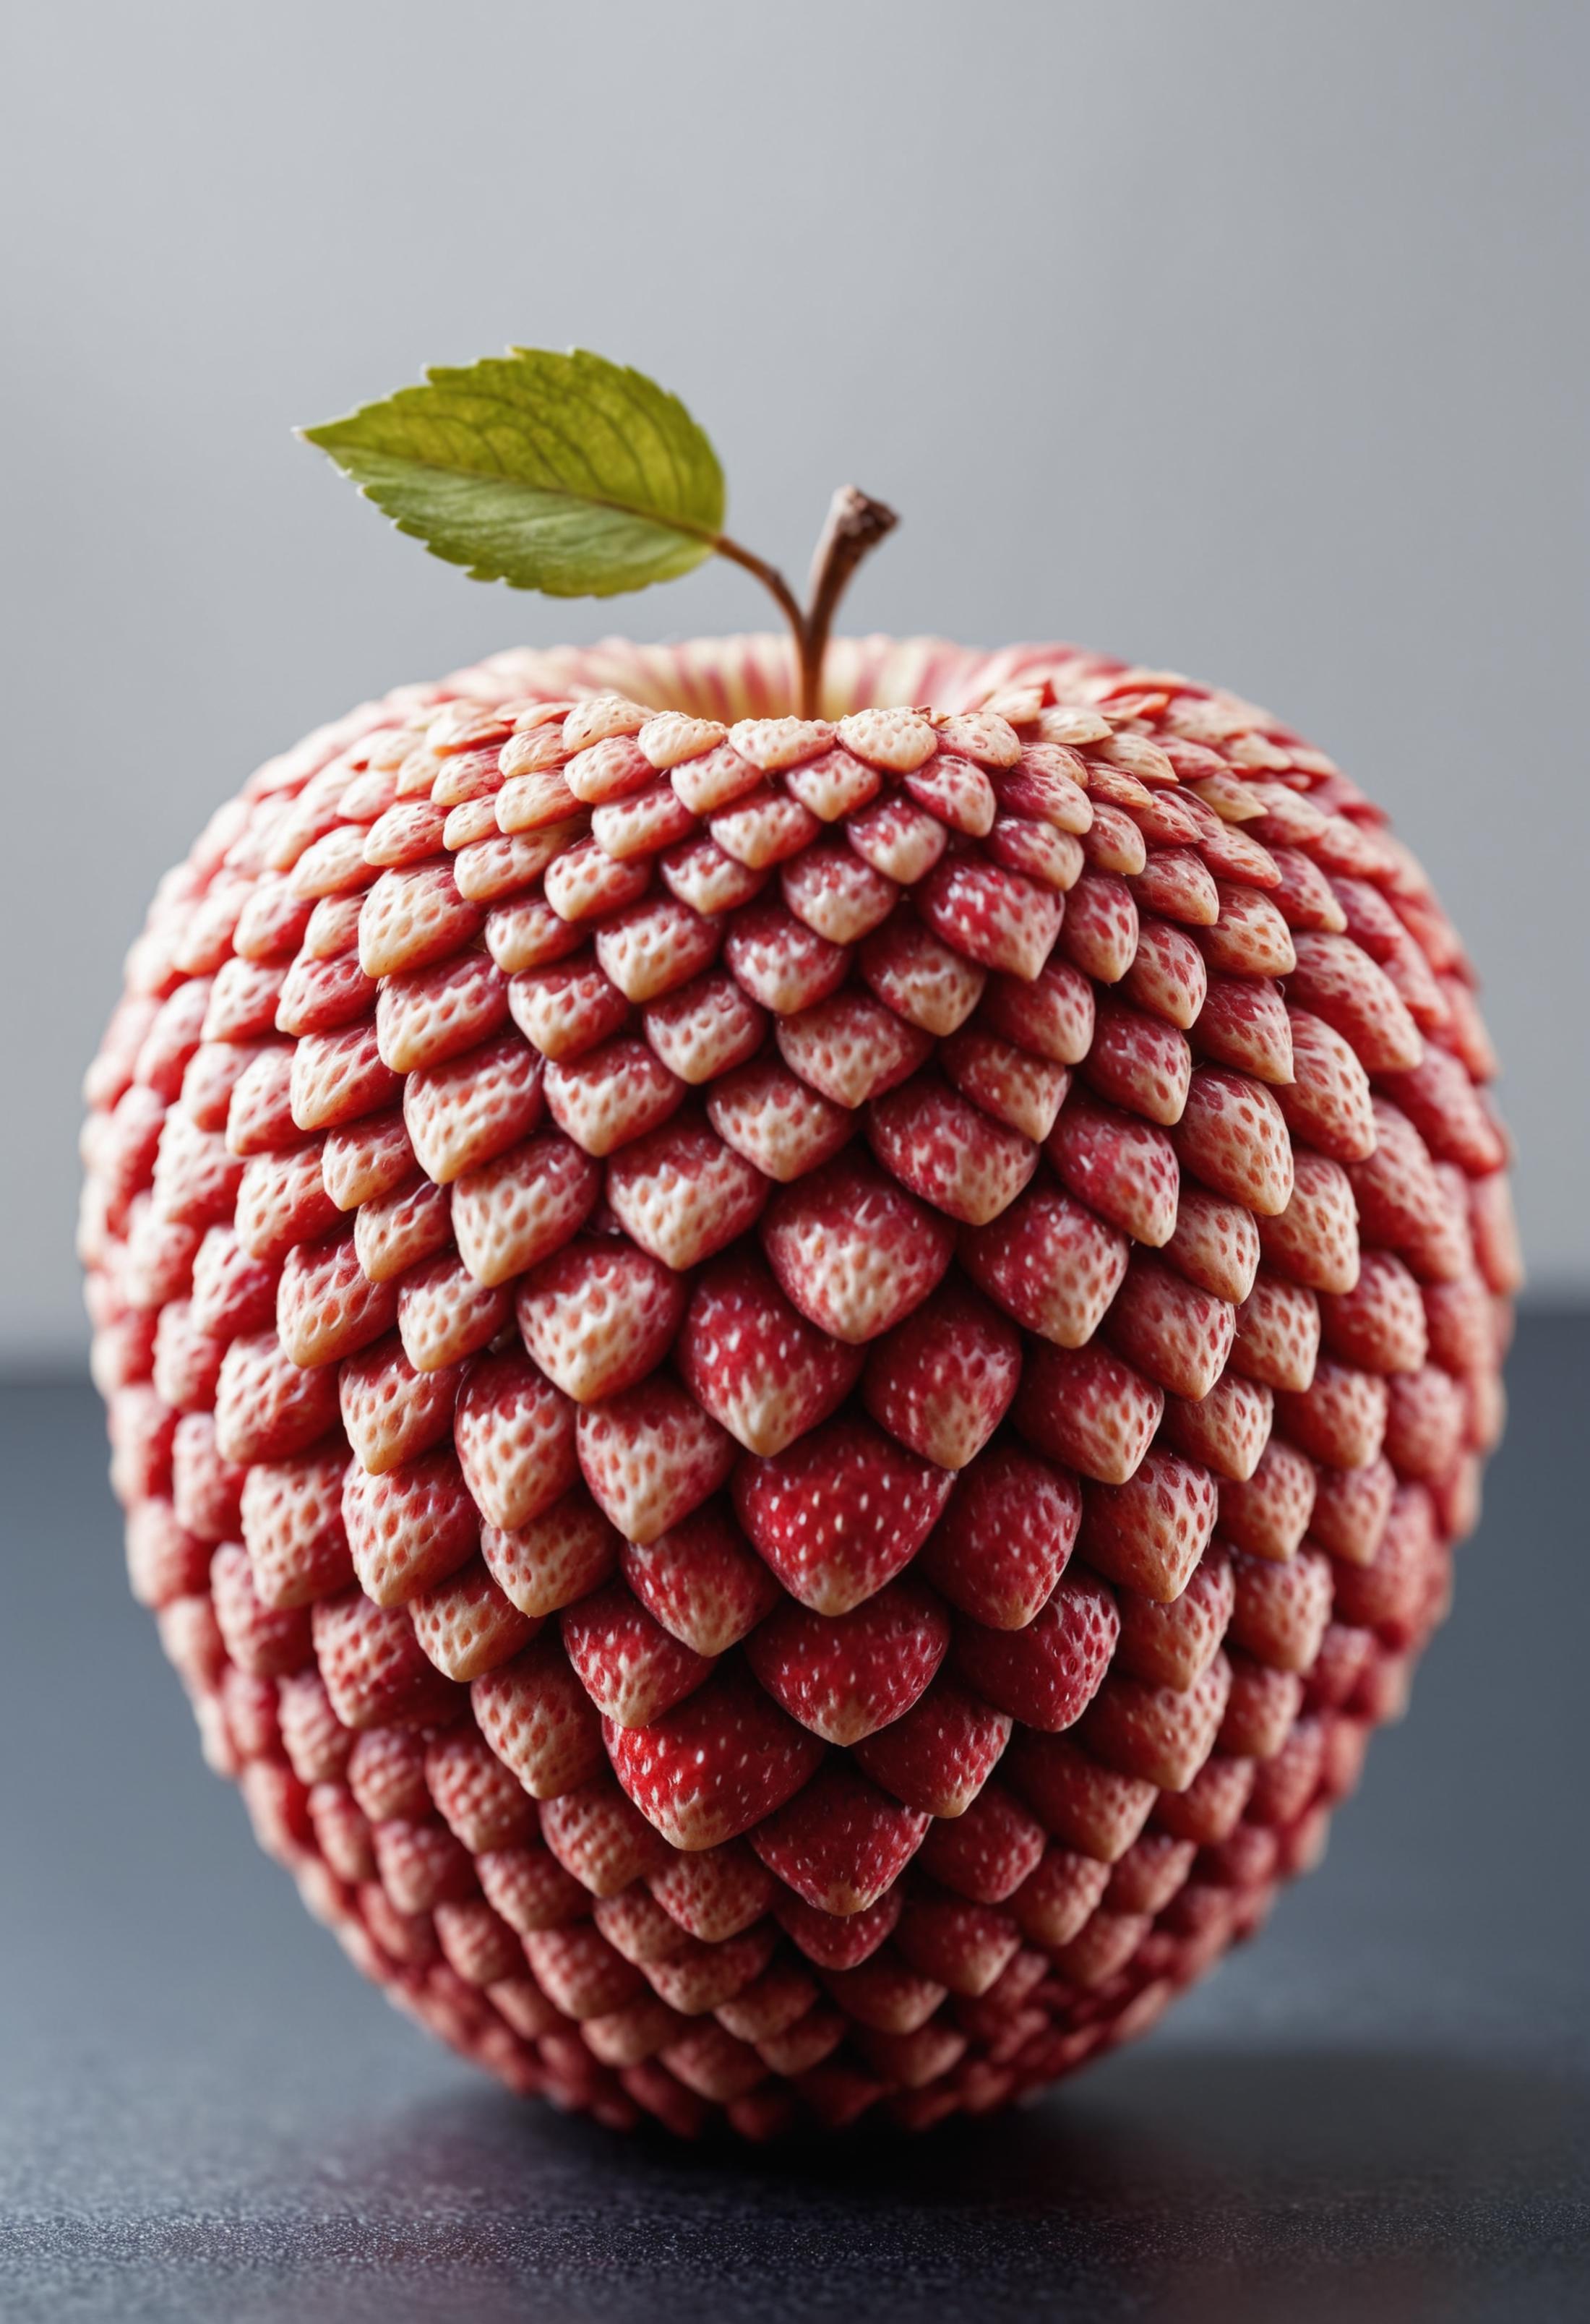 A large red apple with strawberry seeds on top.